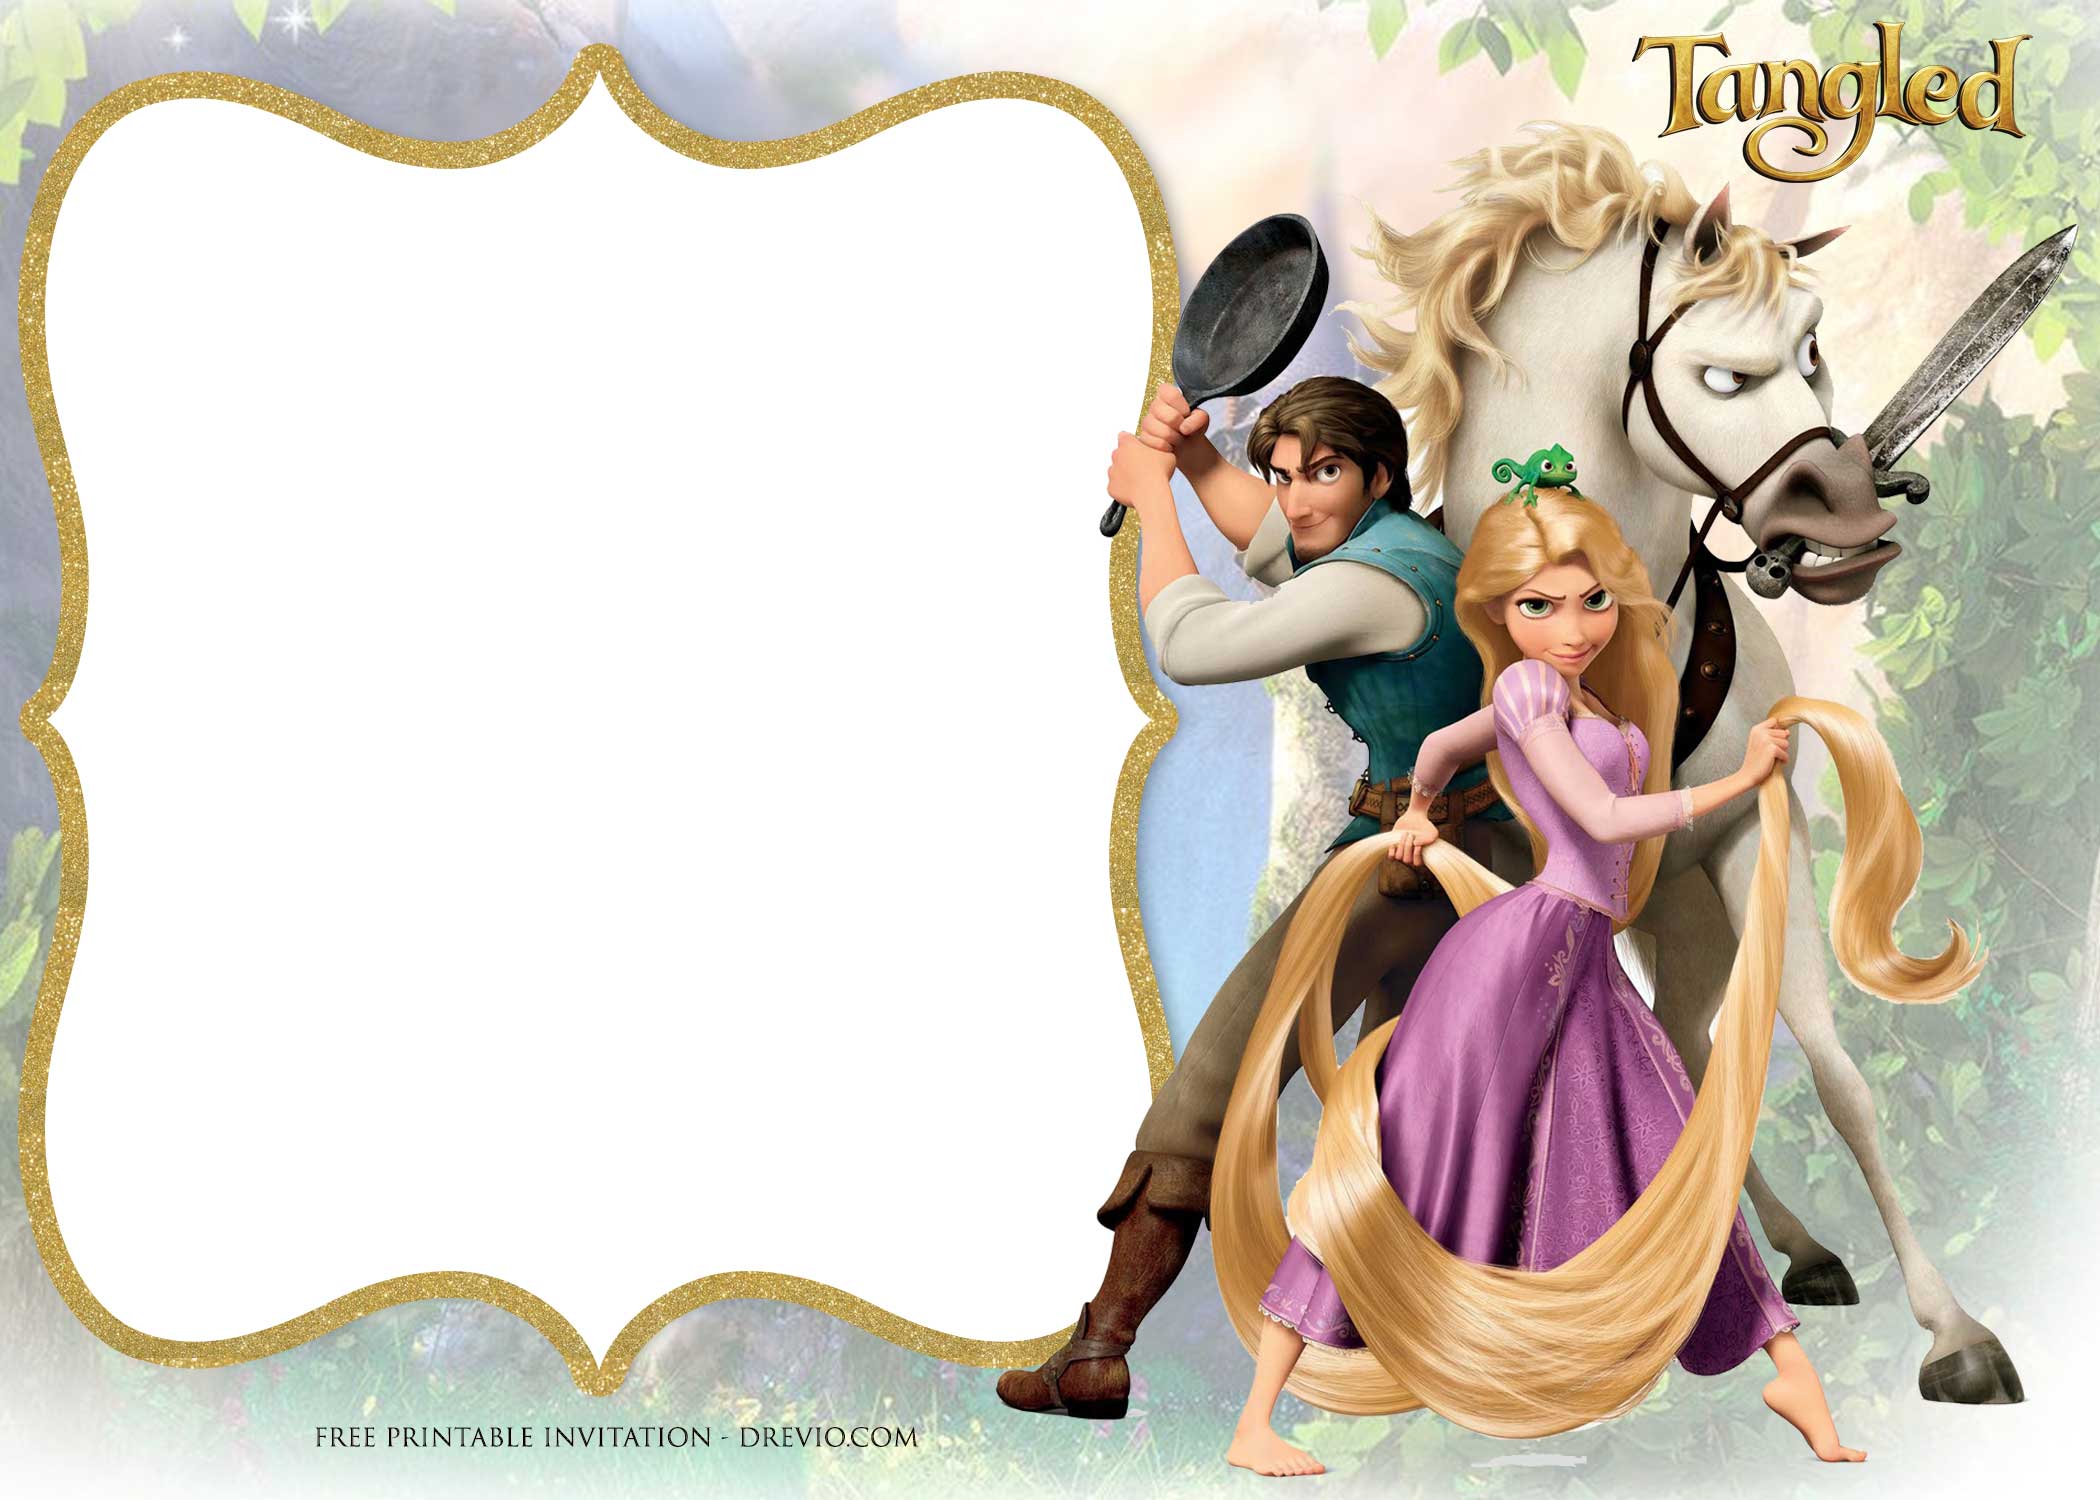 10-tangled-with-princess-rapunzel-birthday-invitation-templates-five-download-hundreds-free